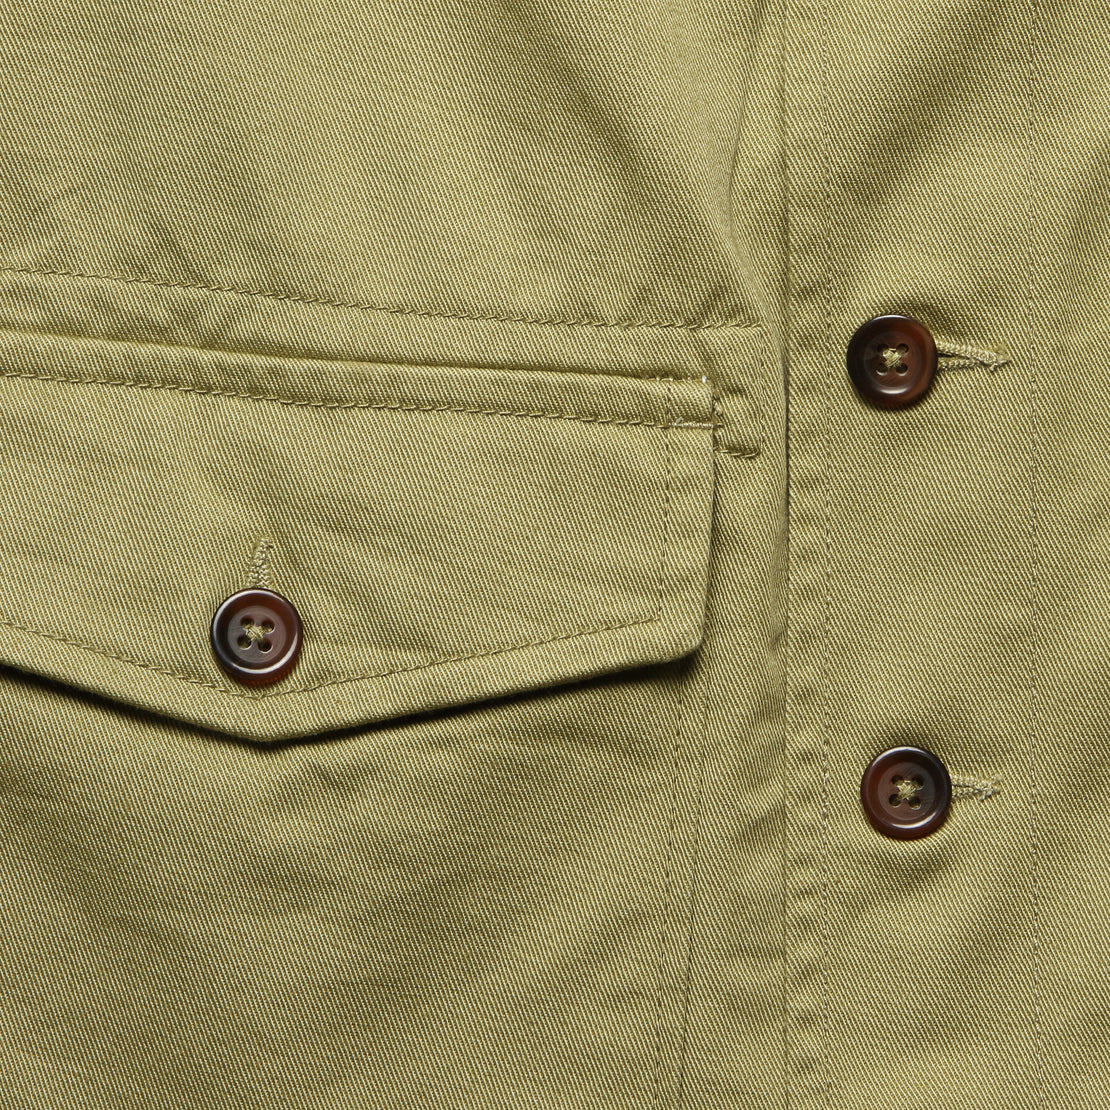 Field Twill Waistcoat - Sand - Universal Works - STAG Provisions - Suiting - Sport Coat